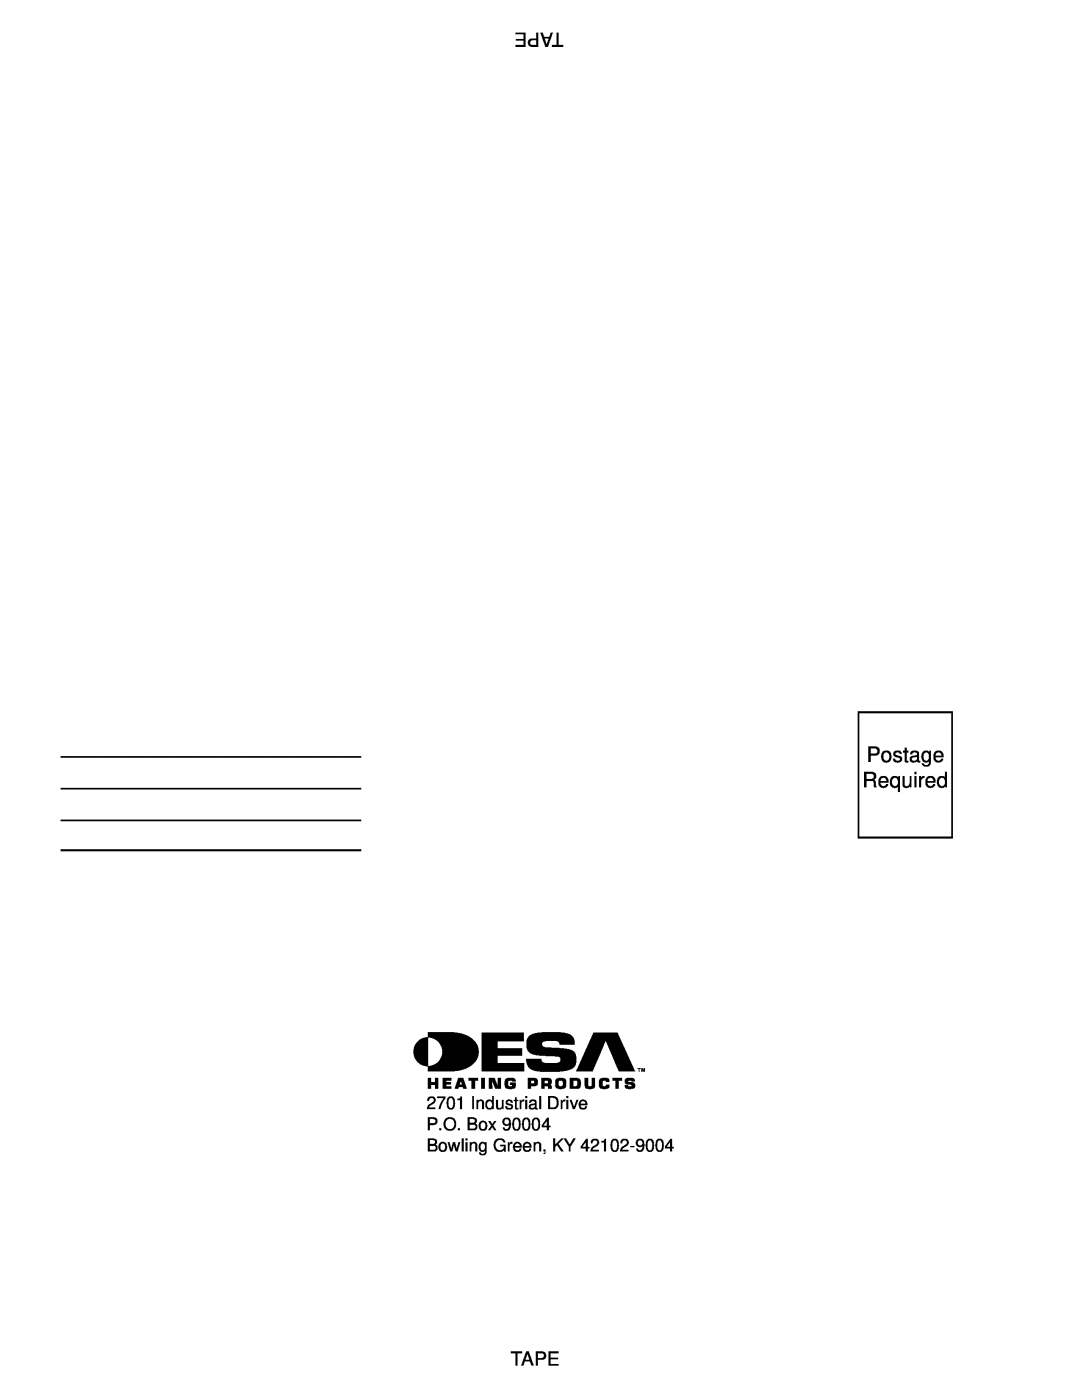 Desa 000 Btu/hr Models owner manual Postage Required, Tape, Industrial Drive P.O. Box Bowling Green, KY 